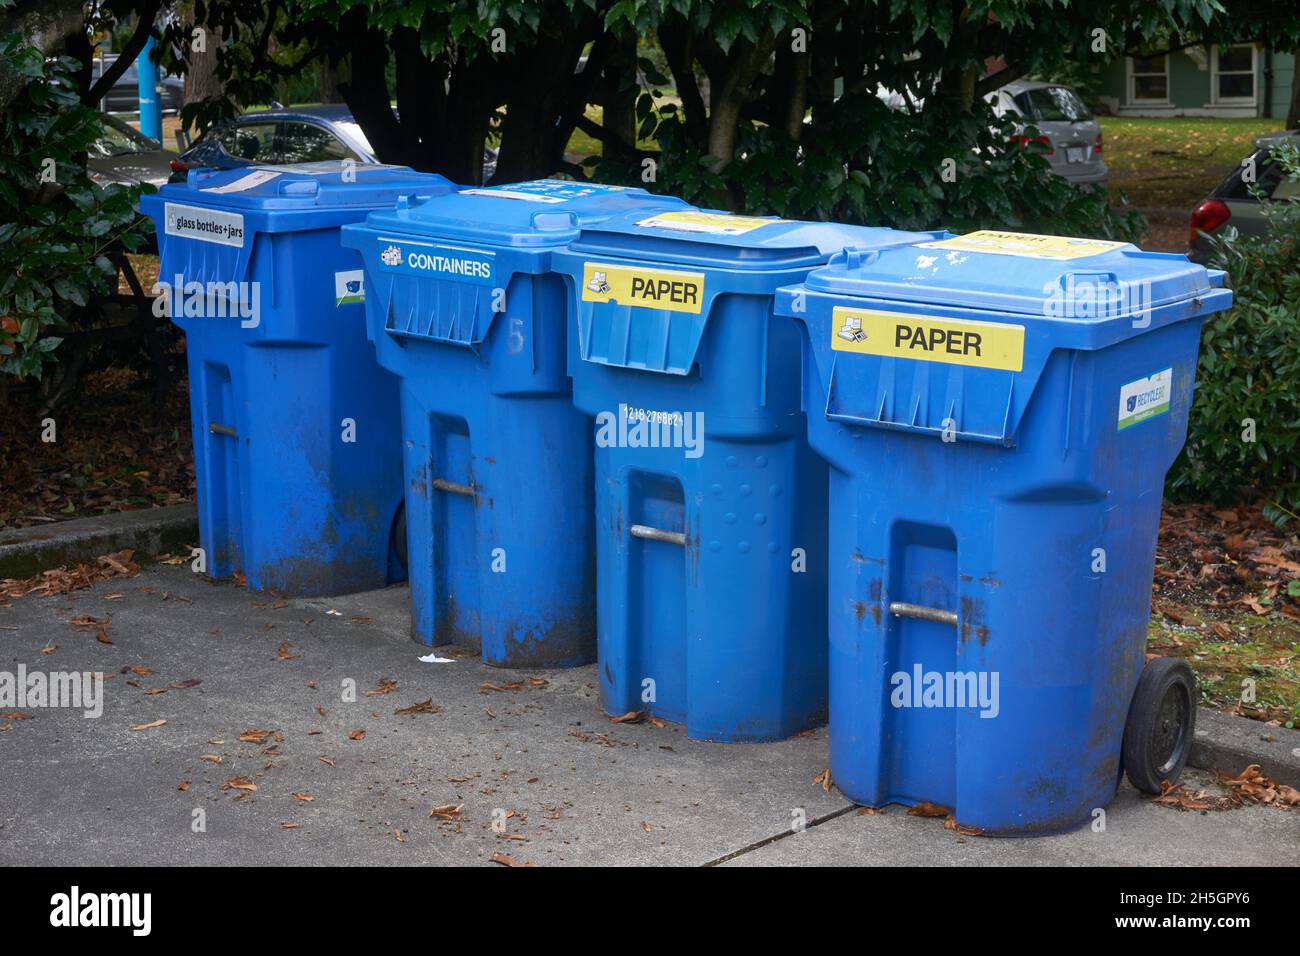 A row of plastic blue recycling bins in Vancouver, British Columbia, Canada Stock Photo